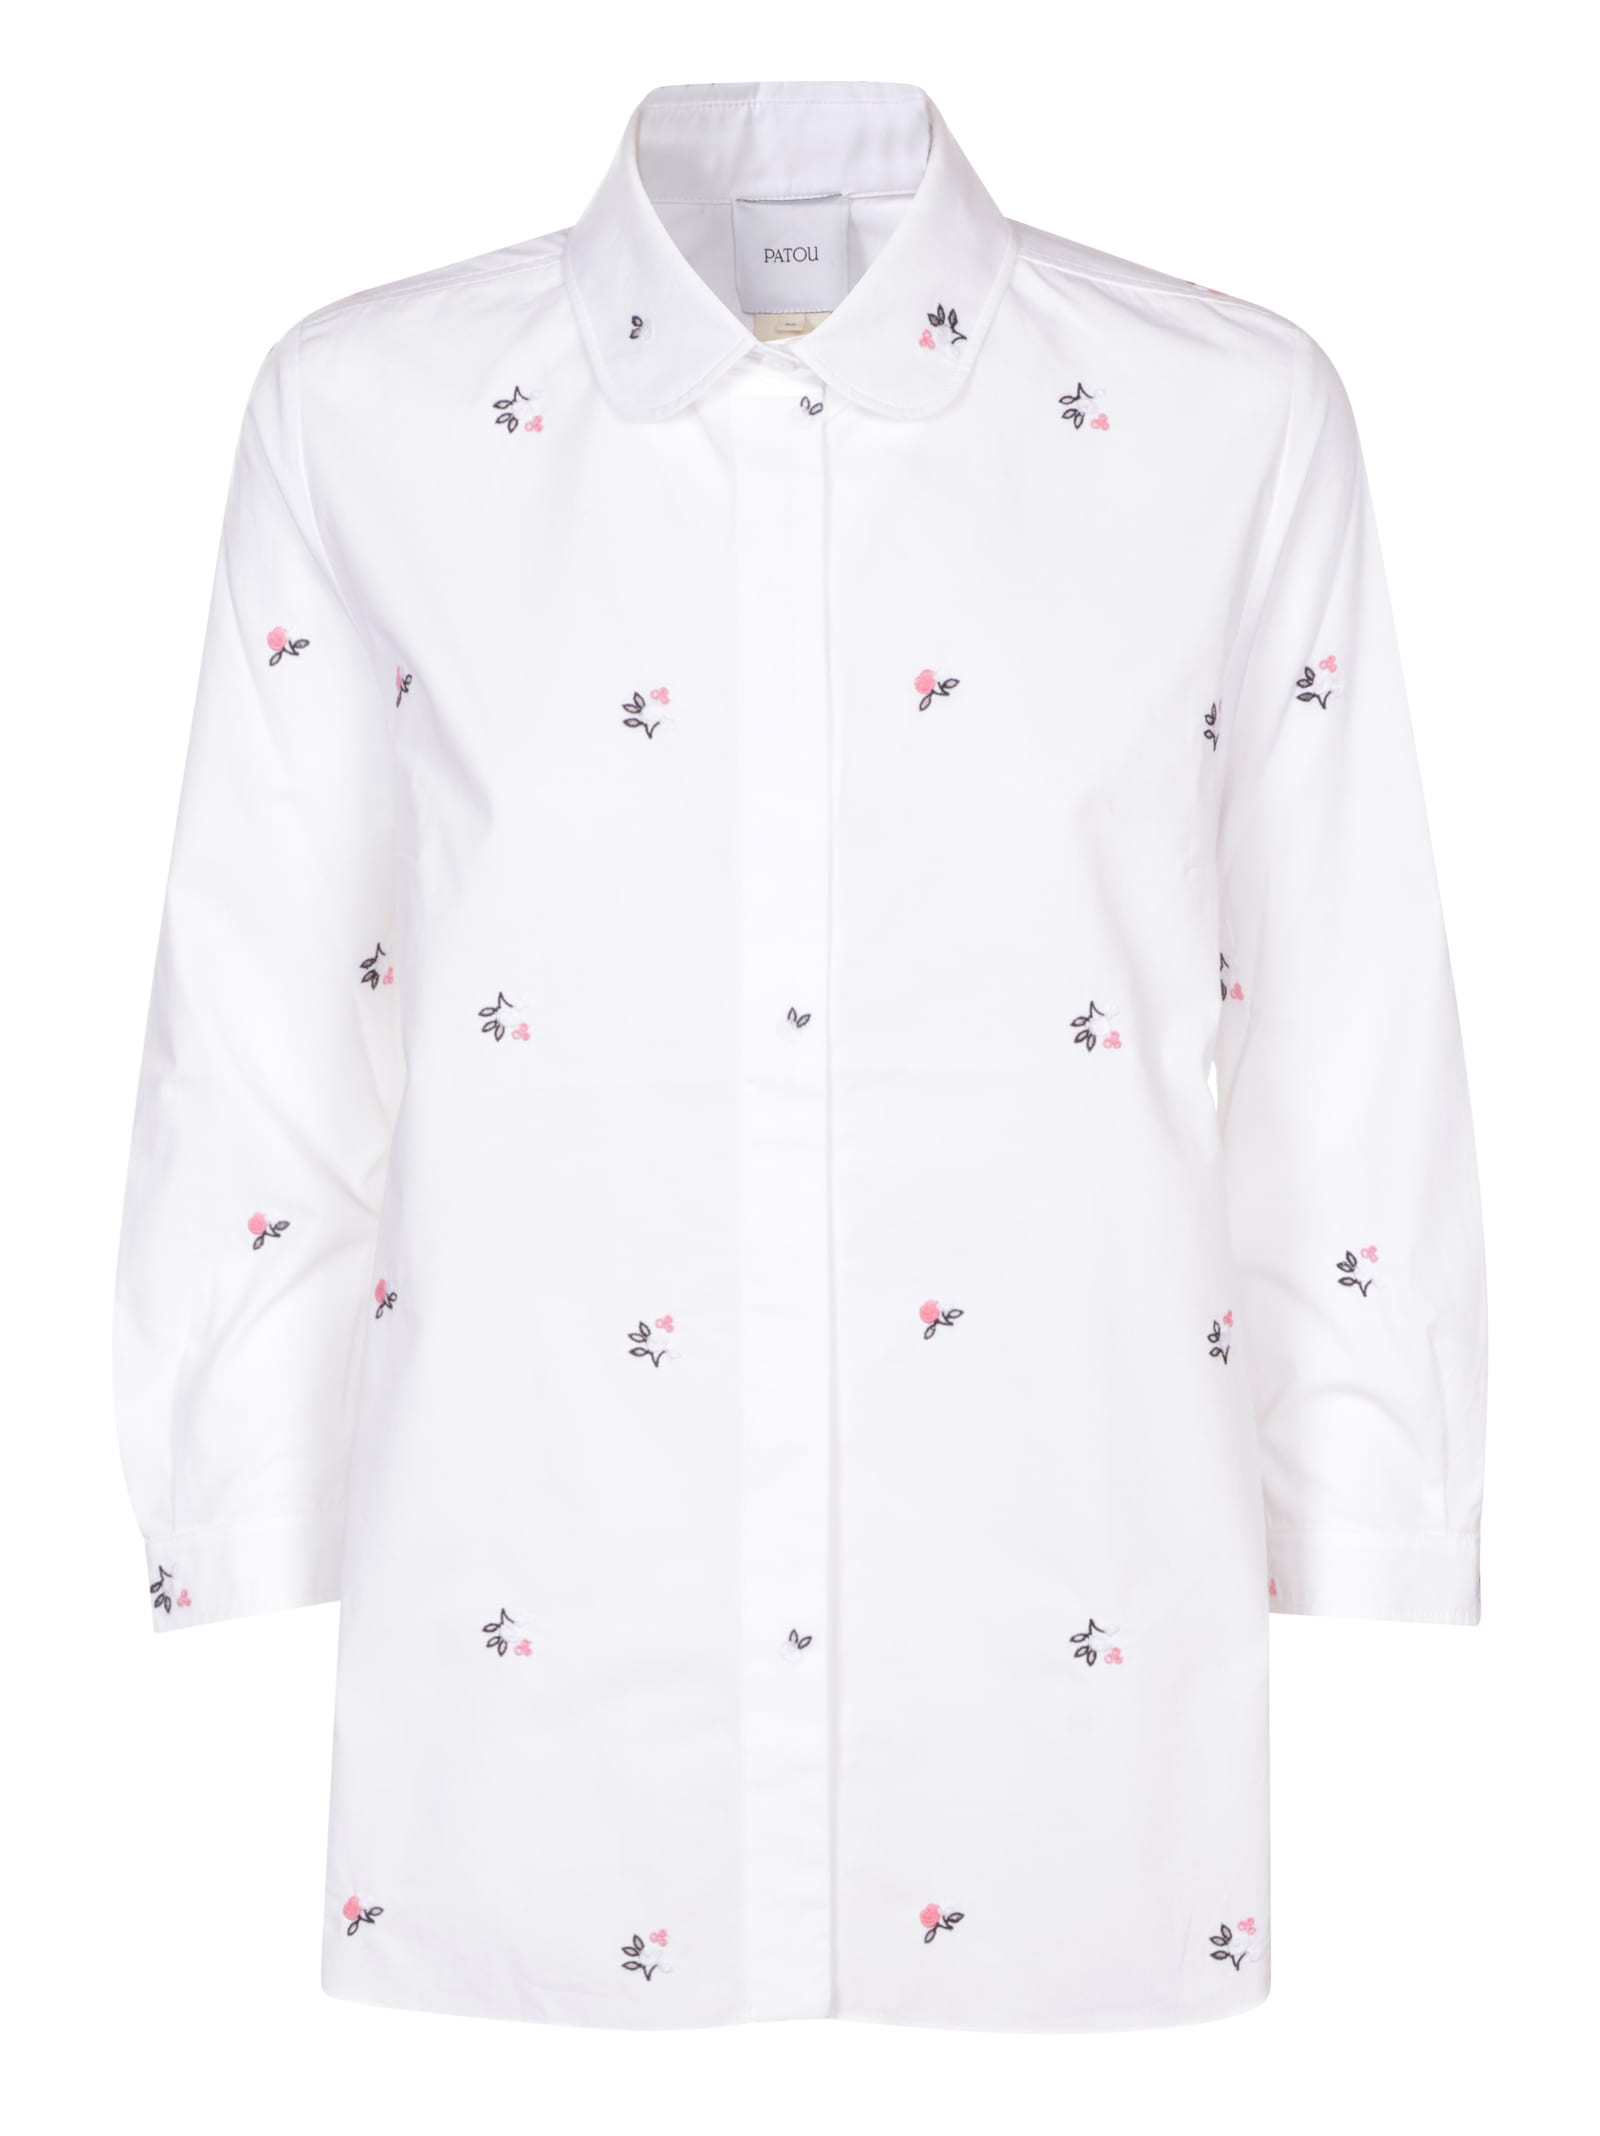 Patou Embroidered Baby Shirt